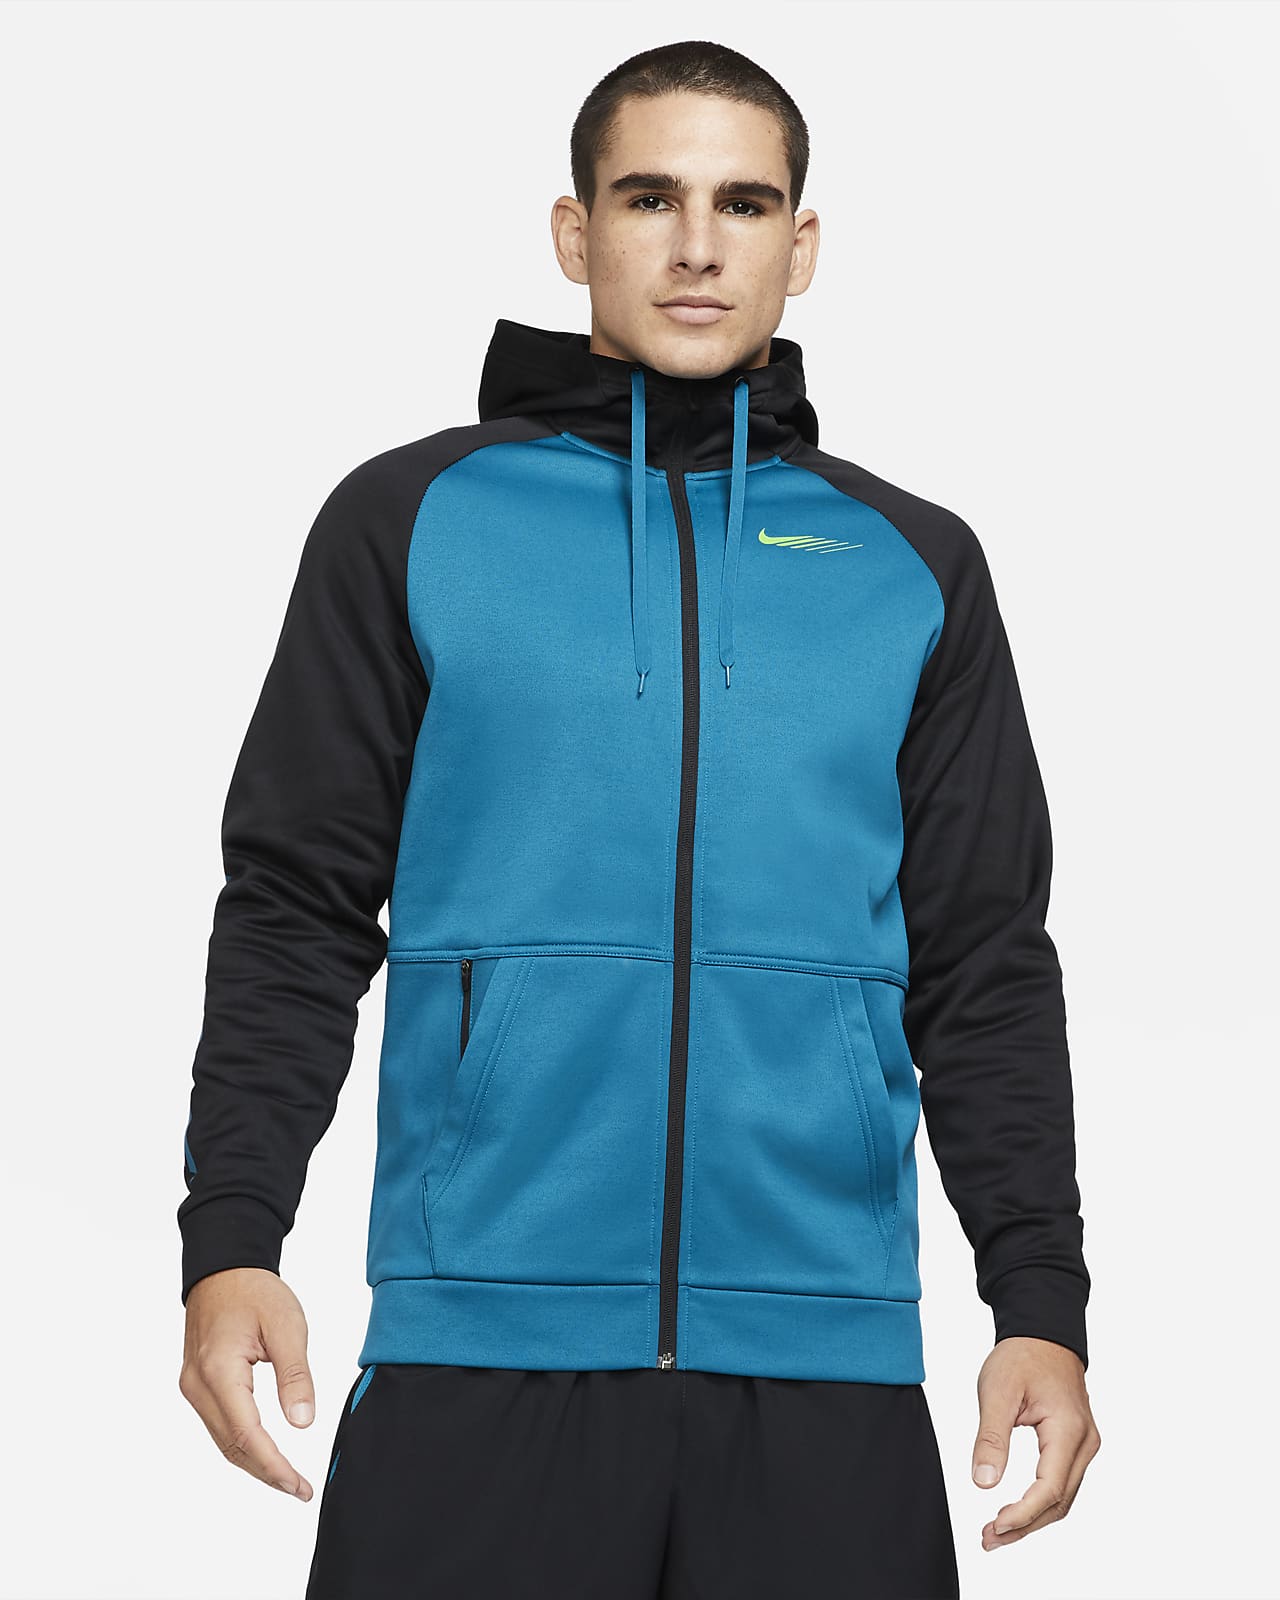 nike training sport pack therma